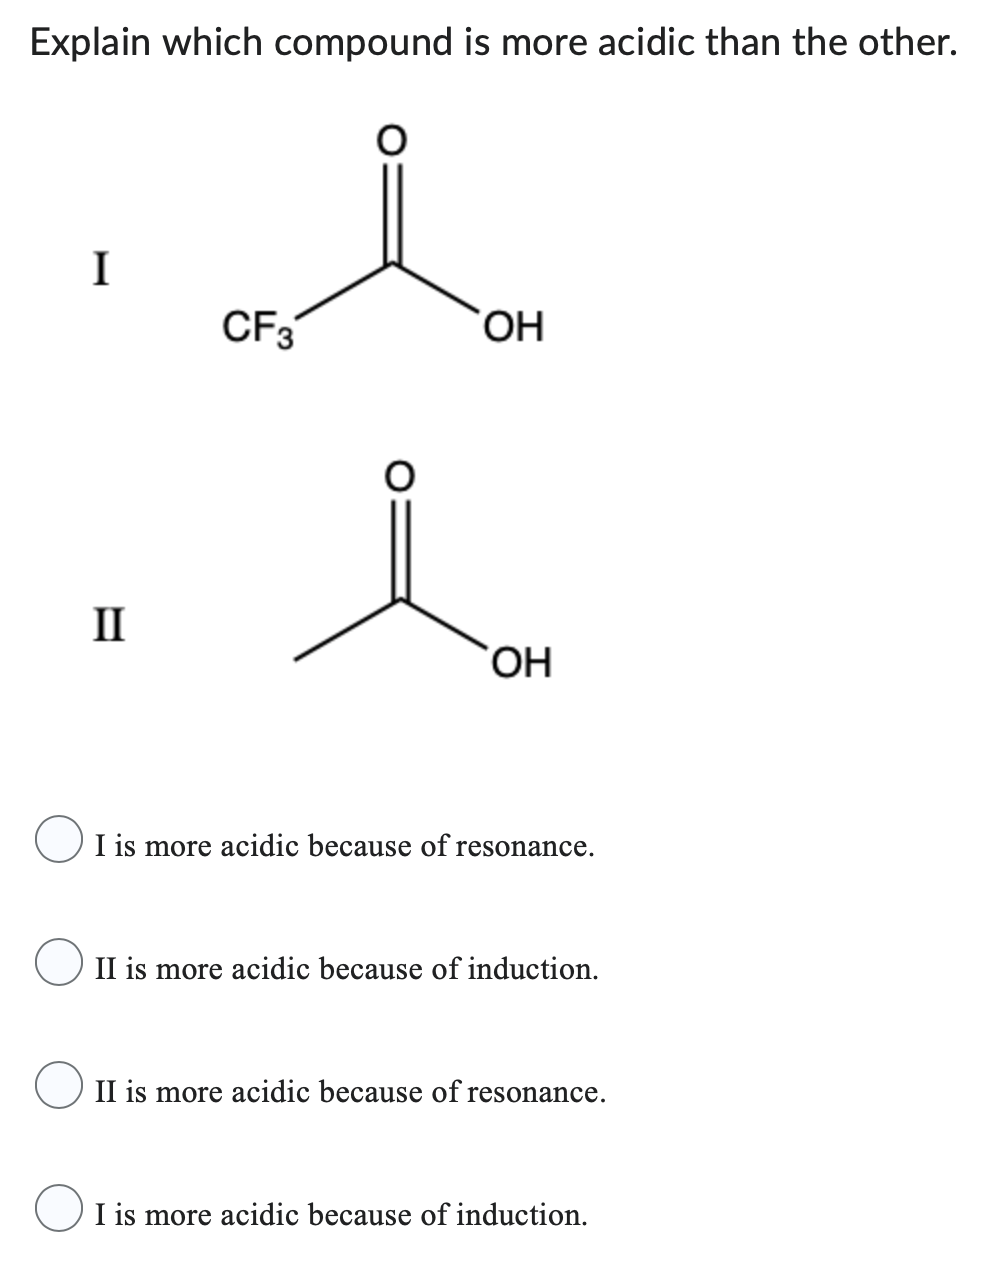 Explain which compound is more acidic than the other.
I
II
CF3
O
OH
OH
I is more acidic because of resonance.
II is more acidic because of induction.
II is more acidic because of resonance.
I is more acidic because of induction.